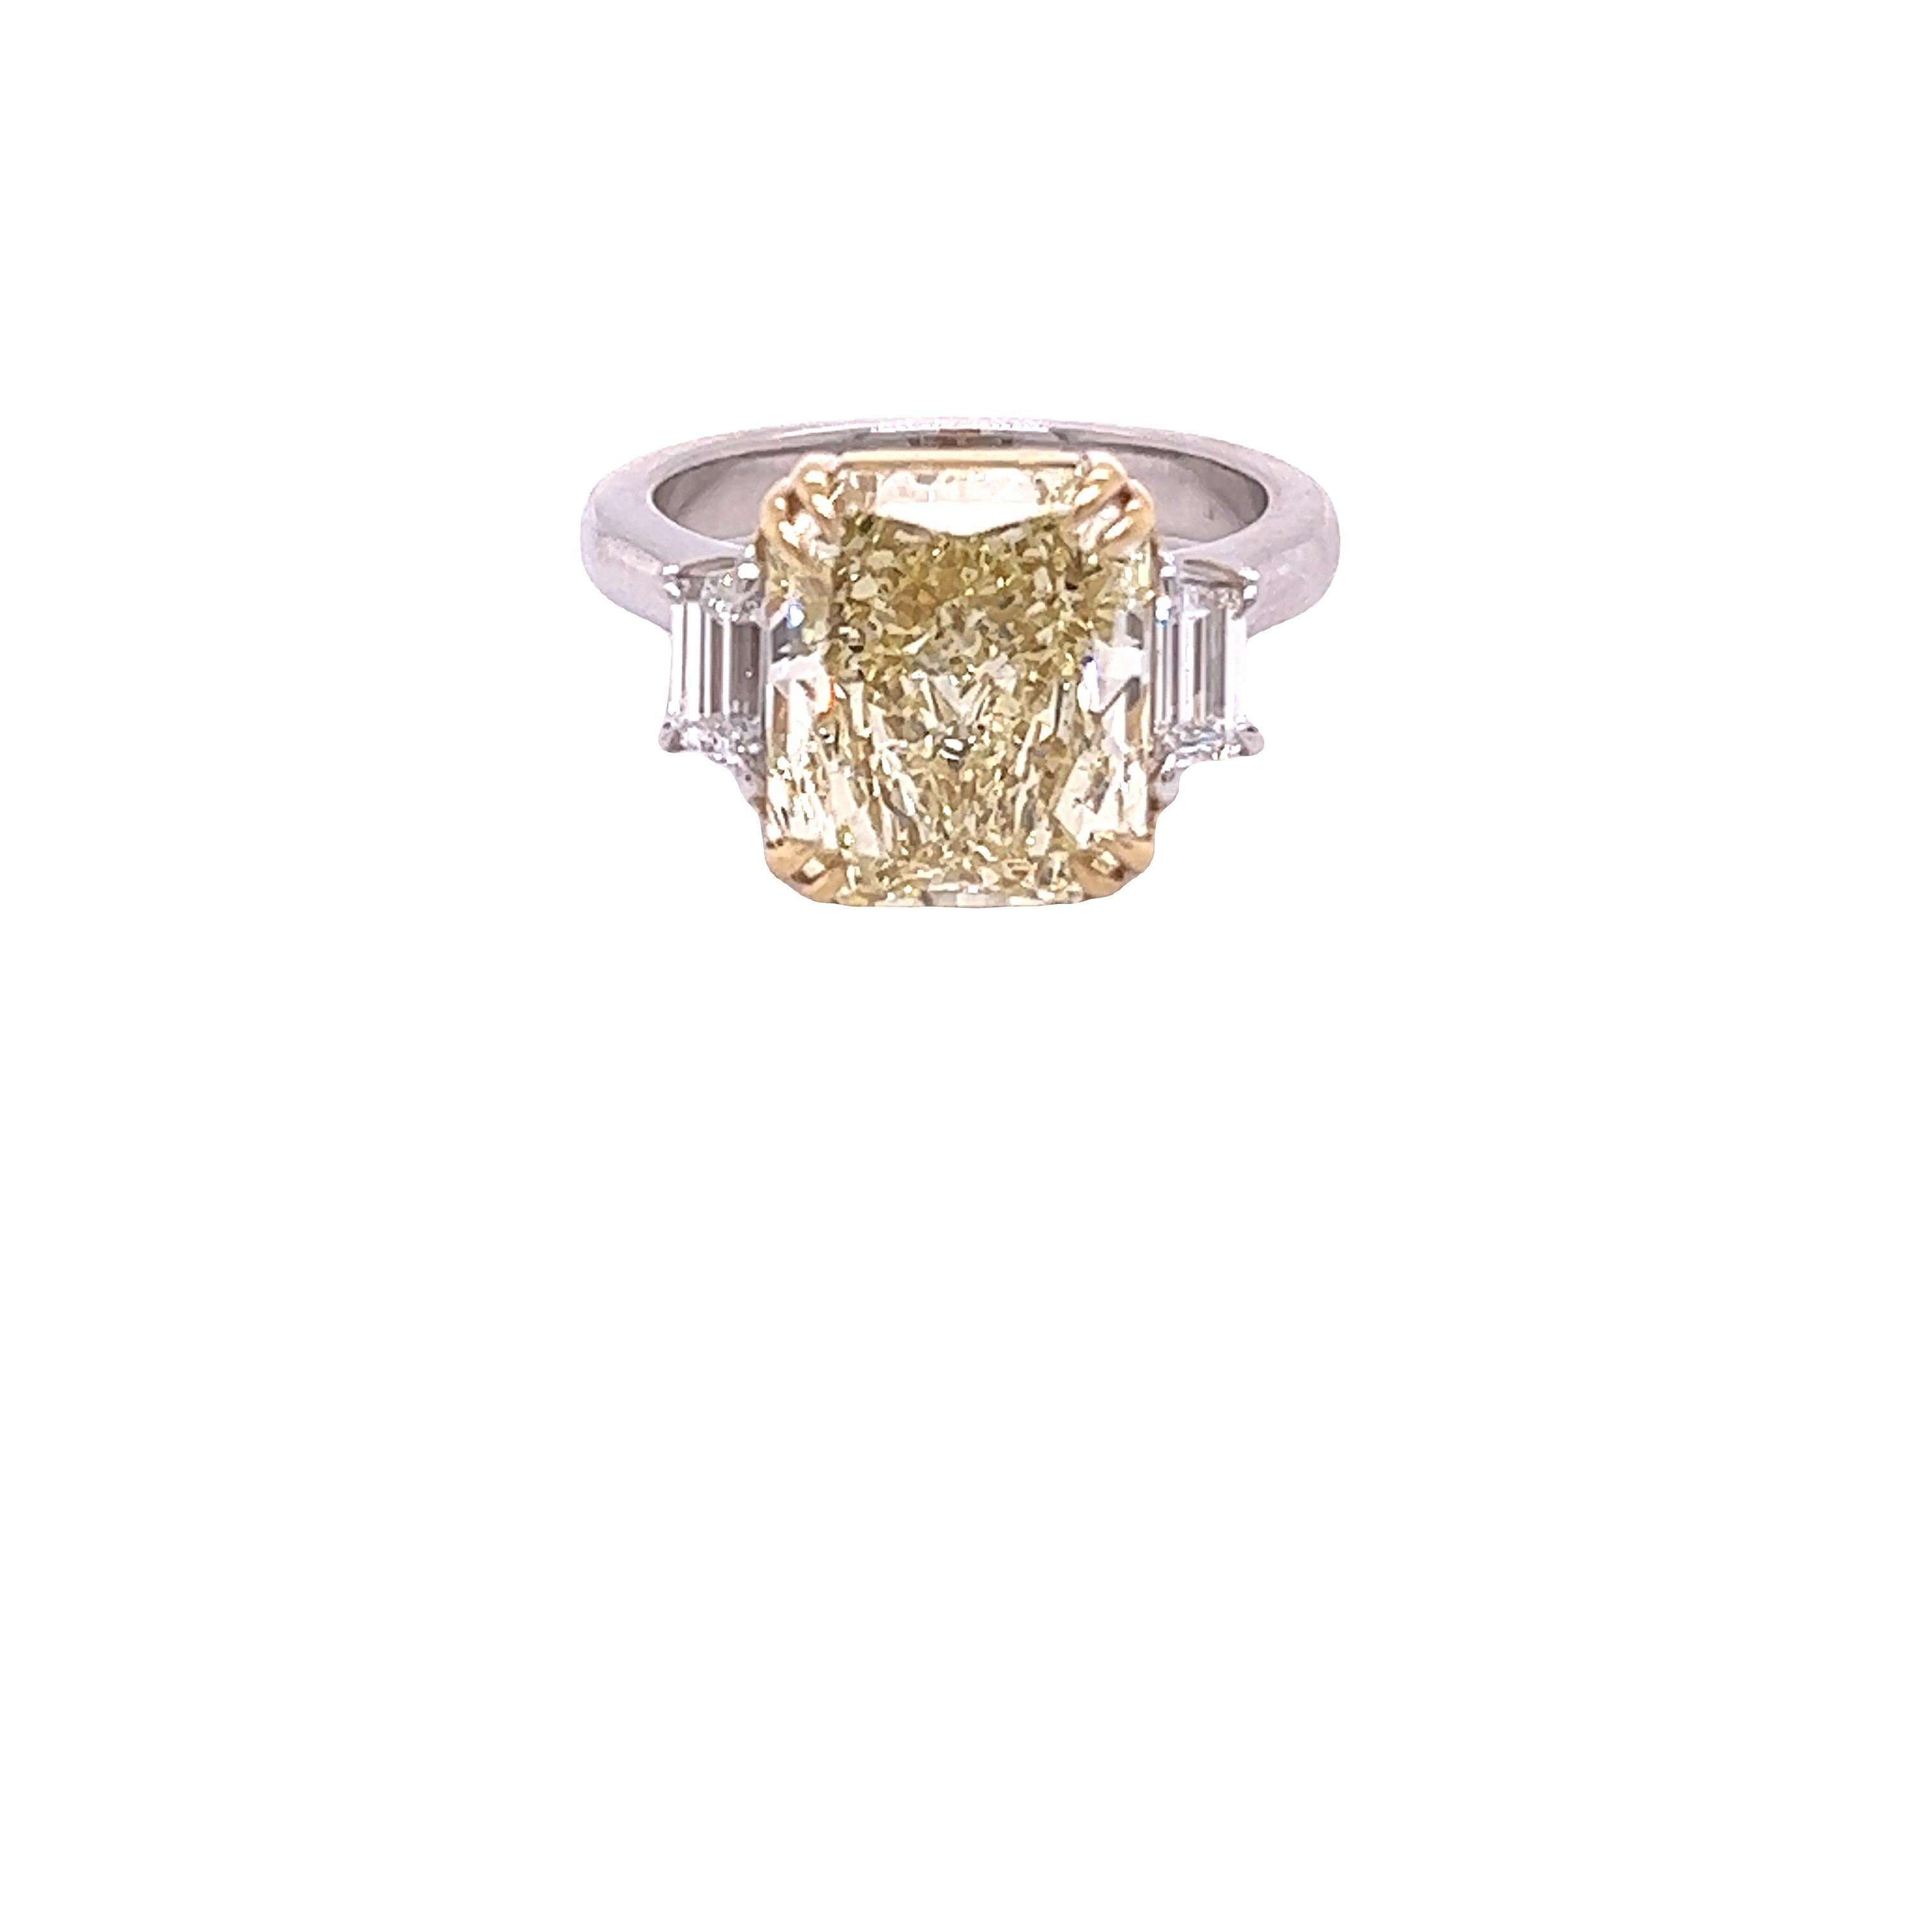 David Rosenberg 5.63 ct Radiant Fancy Light Yellow GIA Diamond Engagement Ring In New Condition For Sale In Boca Raton, FL